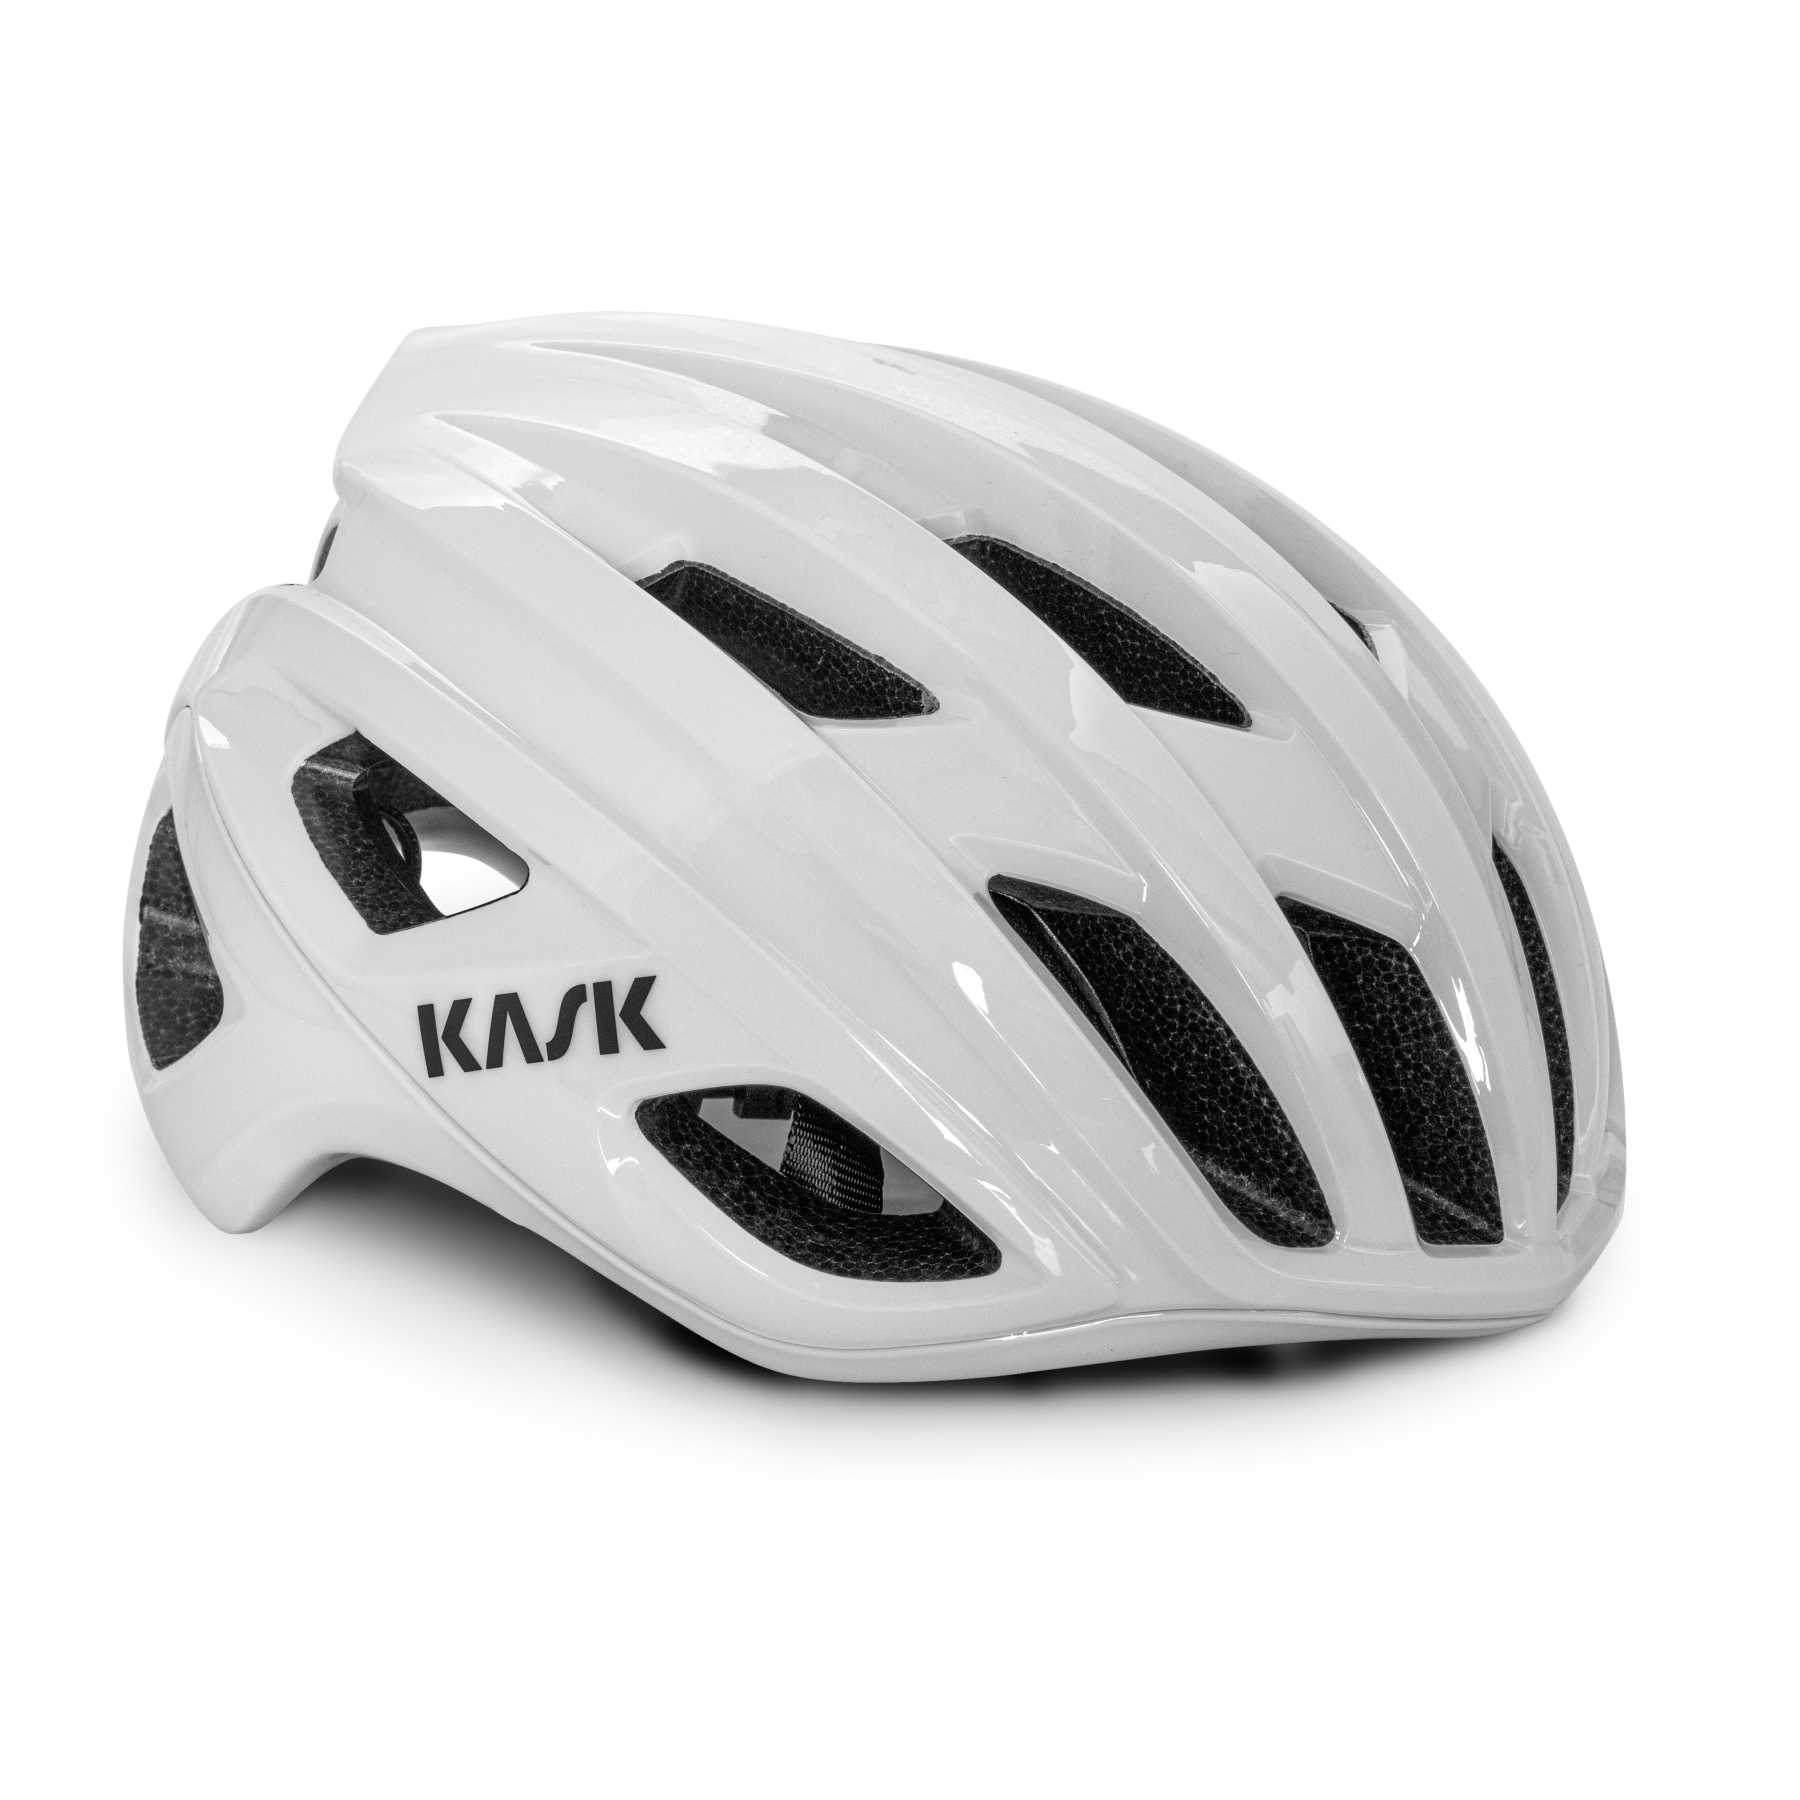 Picture of KASK Mojito³ WG11 Road Helmet - White